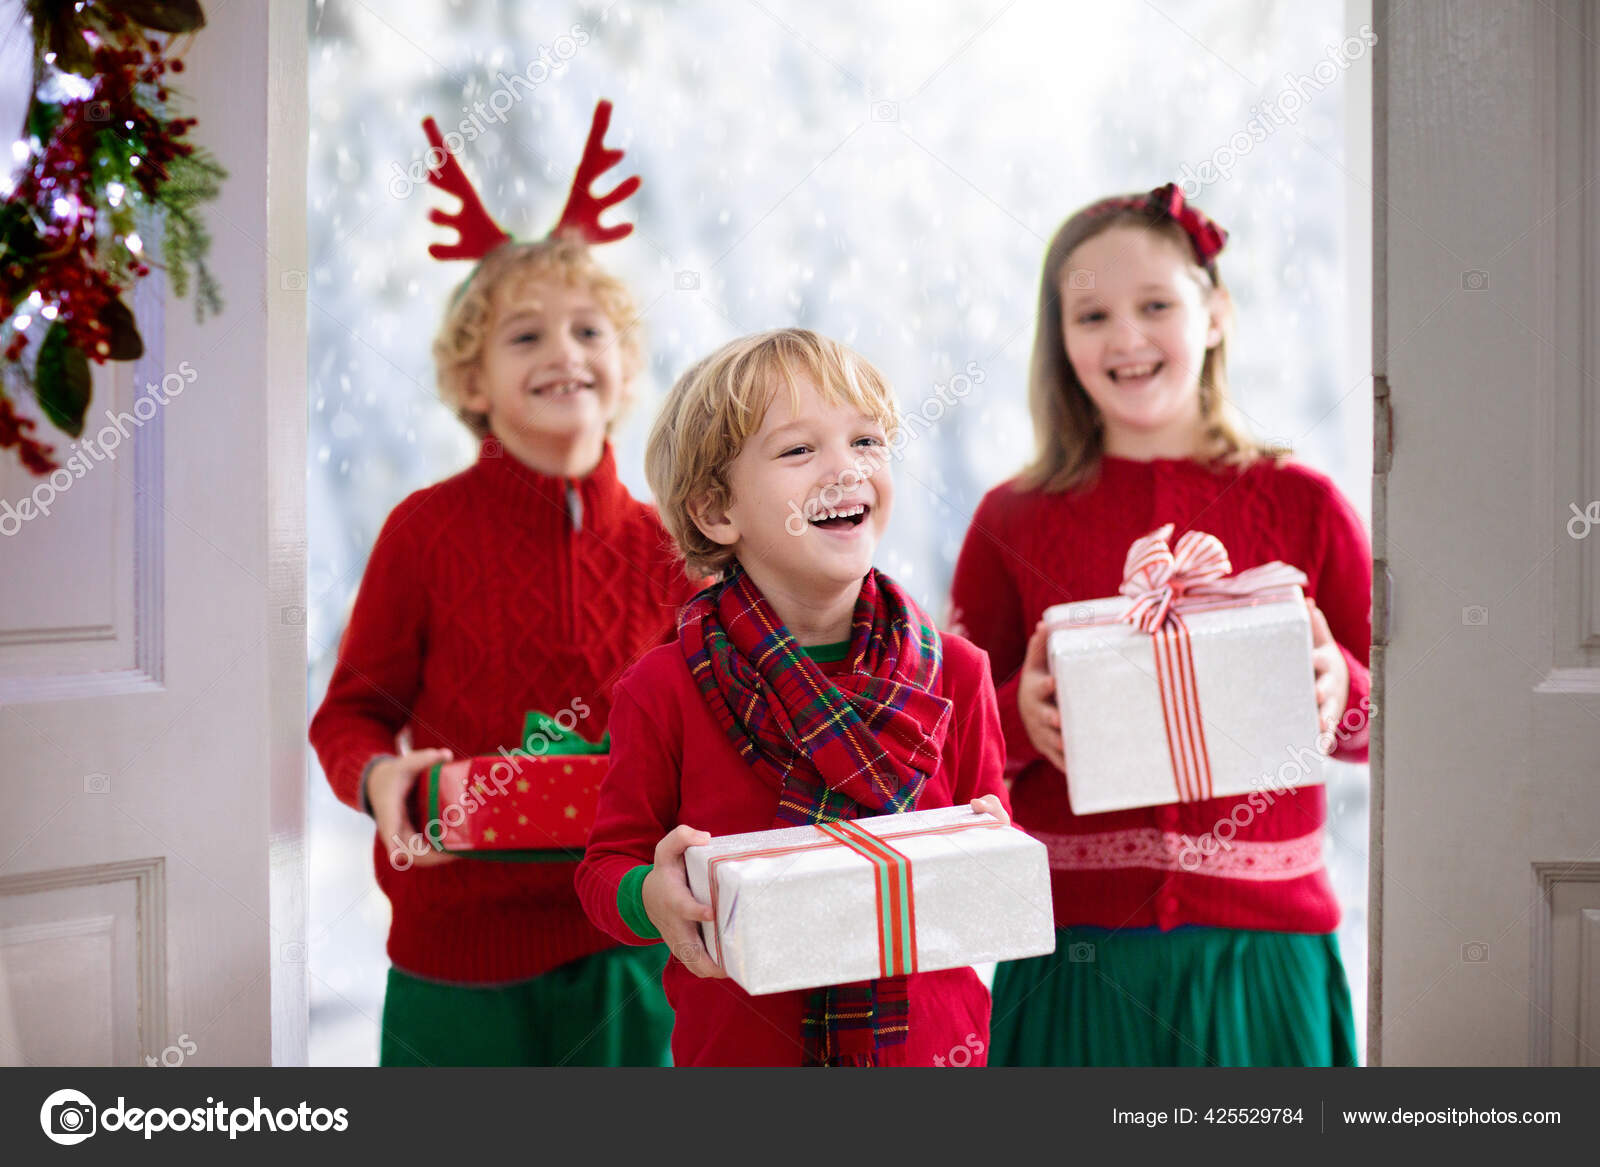   1 Décembre.Bientôt noël . - Page 2 Depositphotos_425529784-stock-photo-family-visiting-grandmother-christmas-day